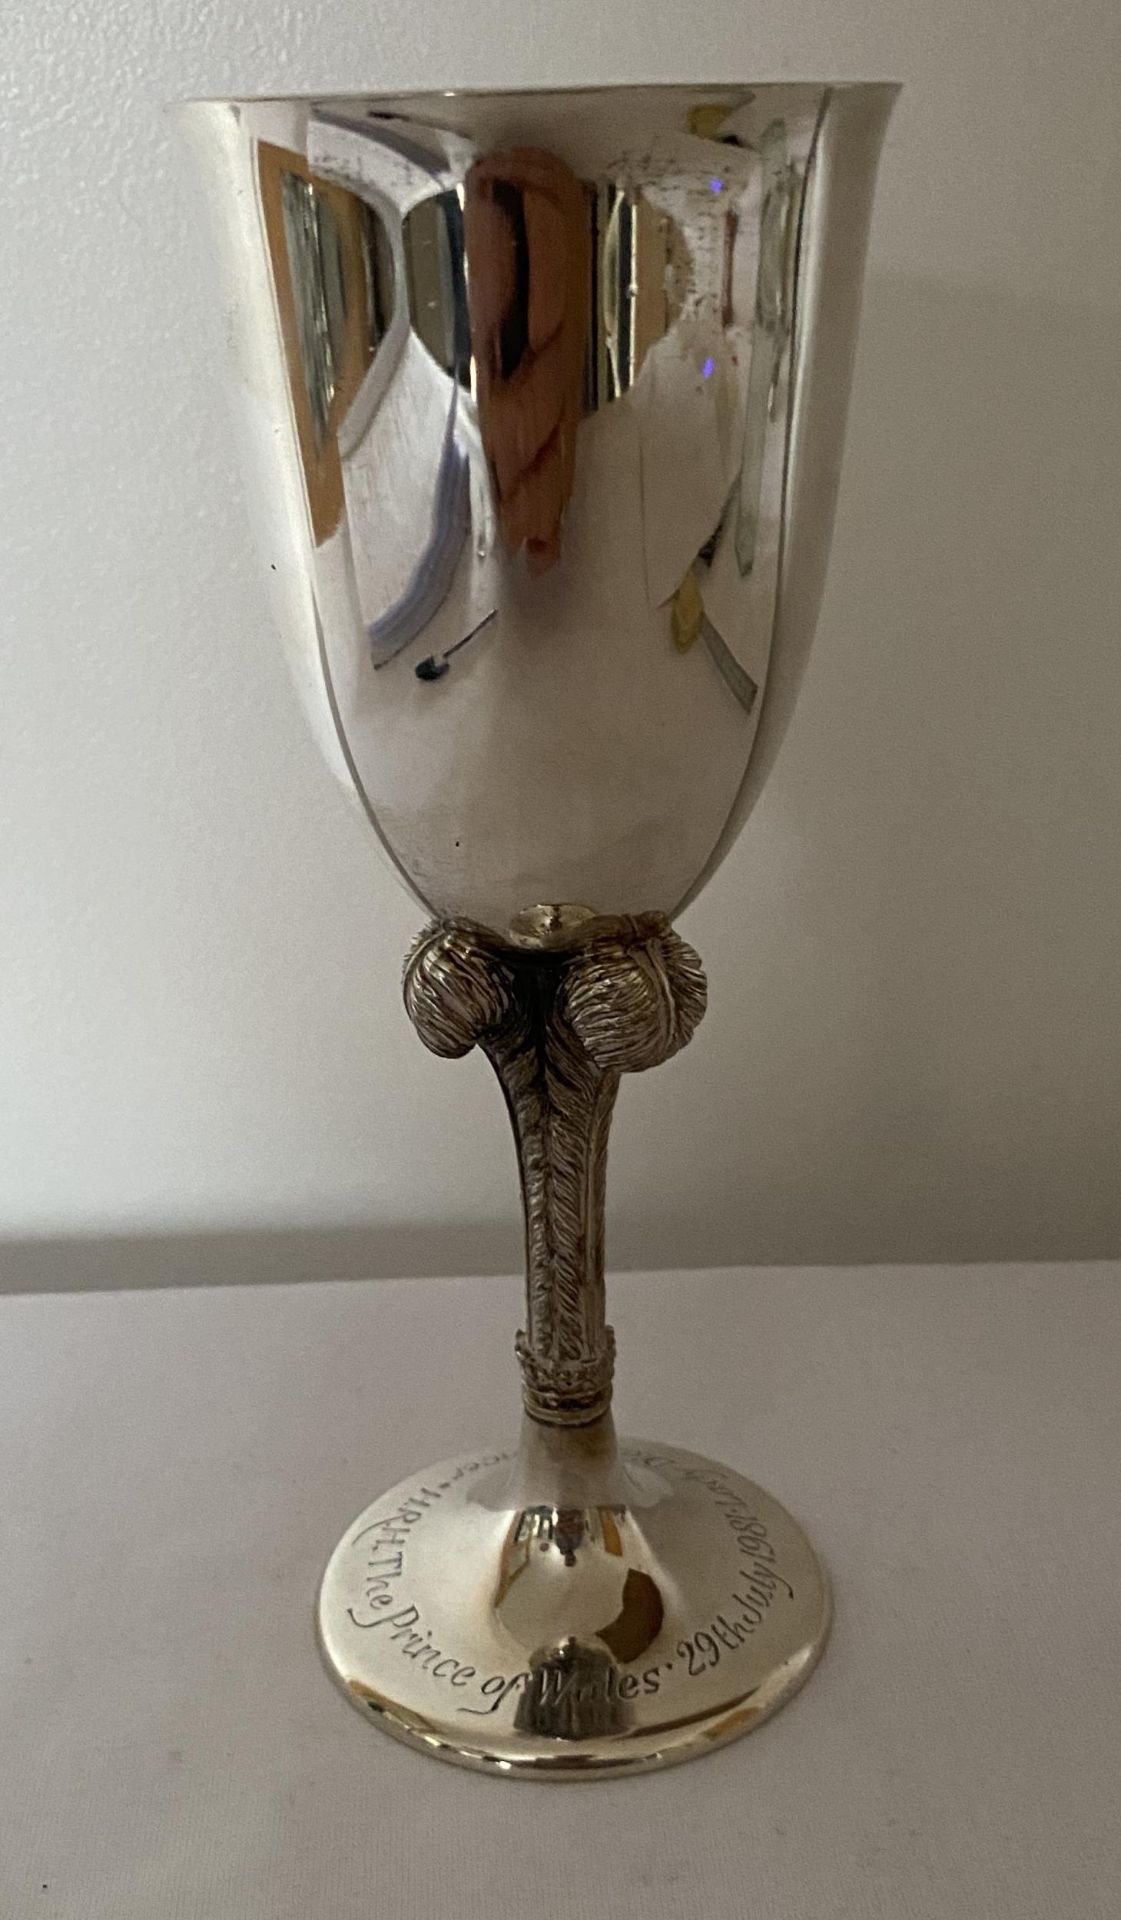 AN ELIZABETH II 1981 HALLMARKED LONDON SILVER COMMEMORATIVE LADY DIANA AND PRINCE CHARLES GOBLET - Image 3 of 24